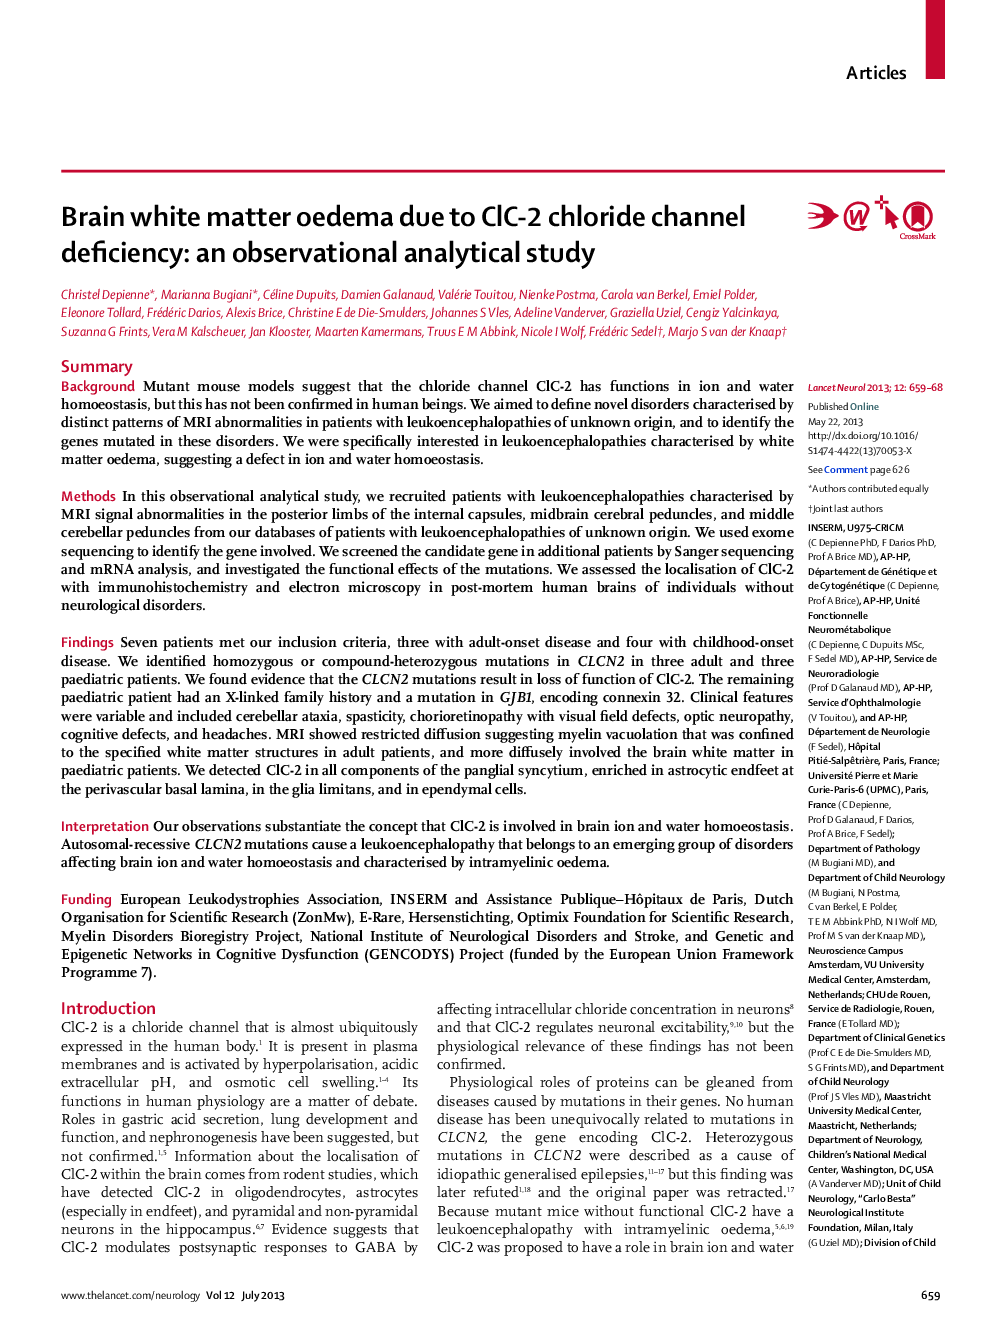 Brain white matter oedema due to ClC-2 chloride channel deficiency: an observational analytical study